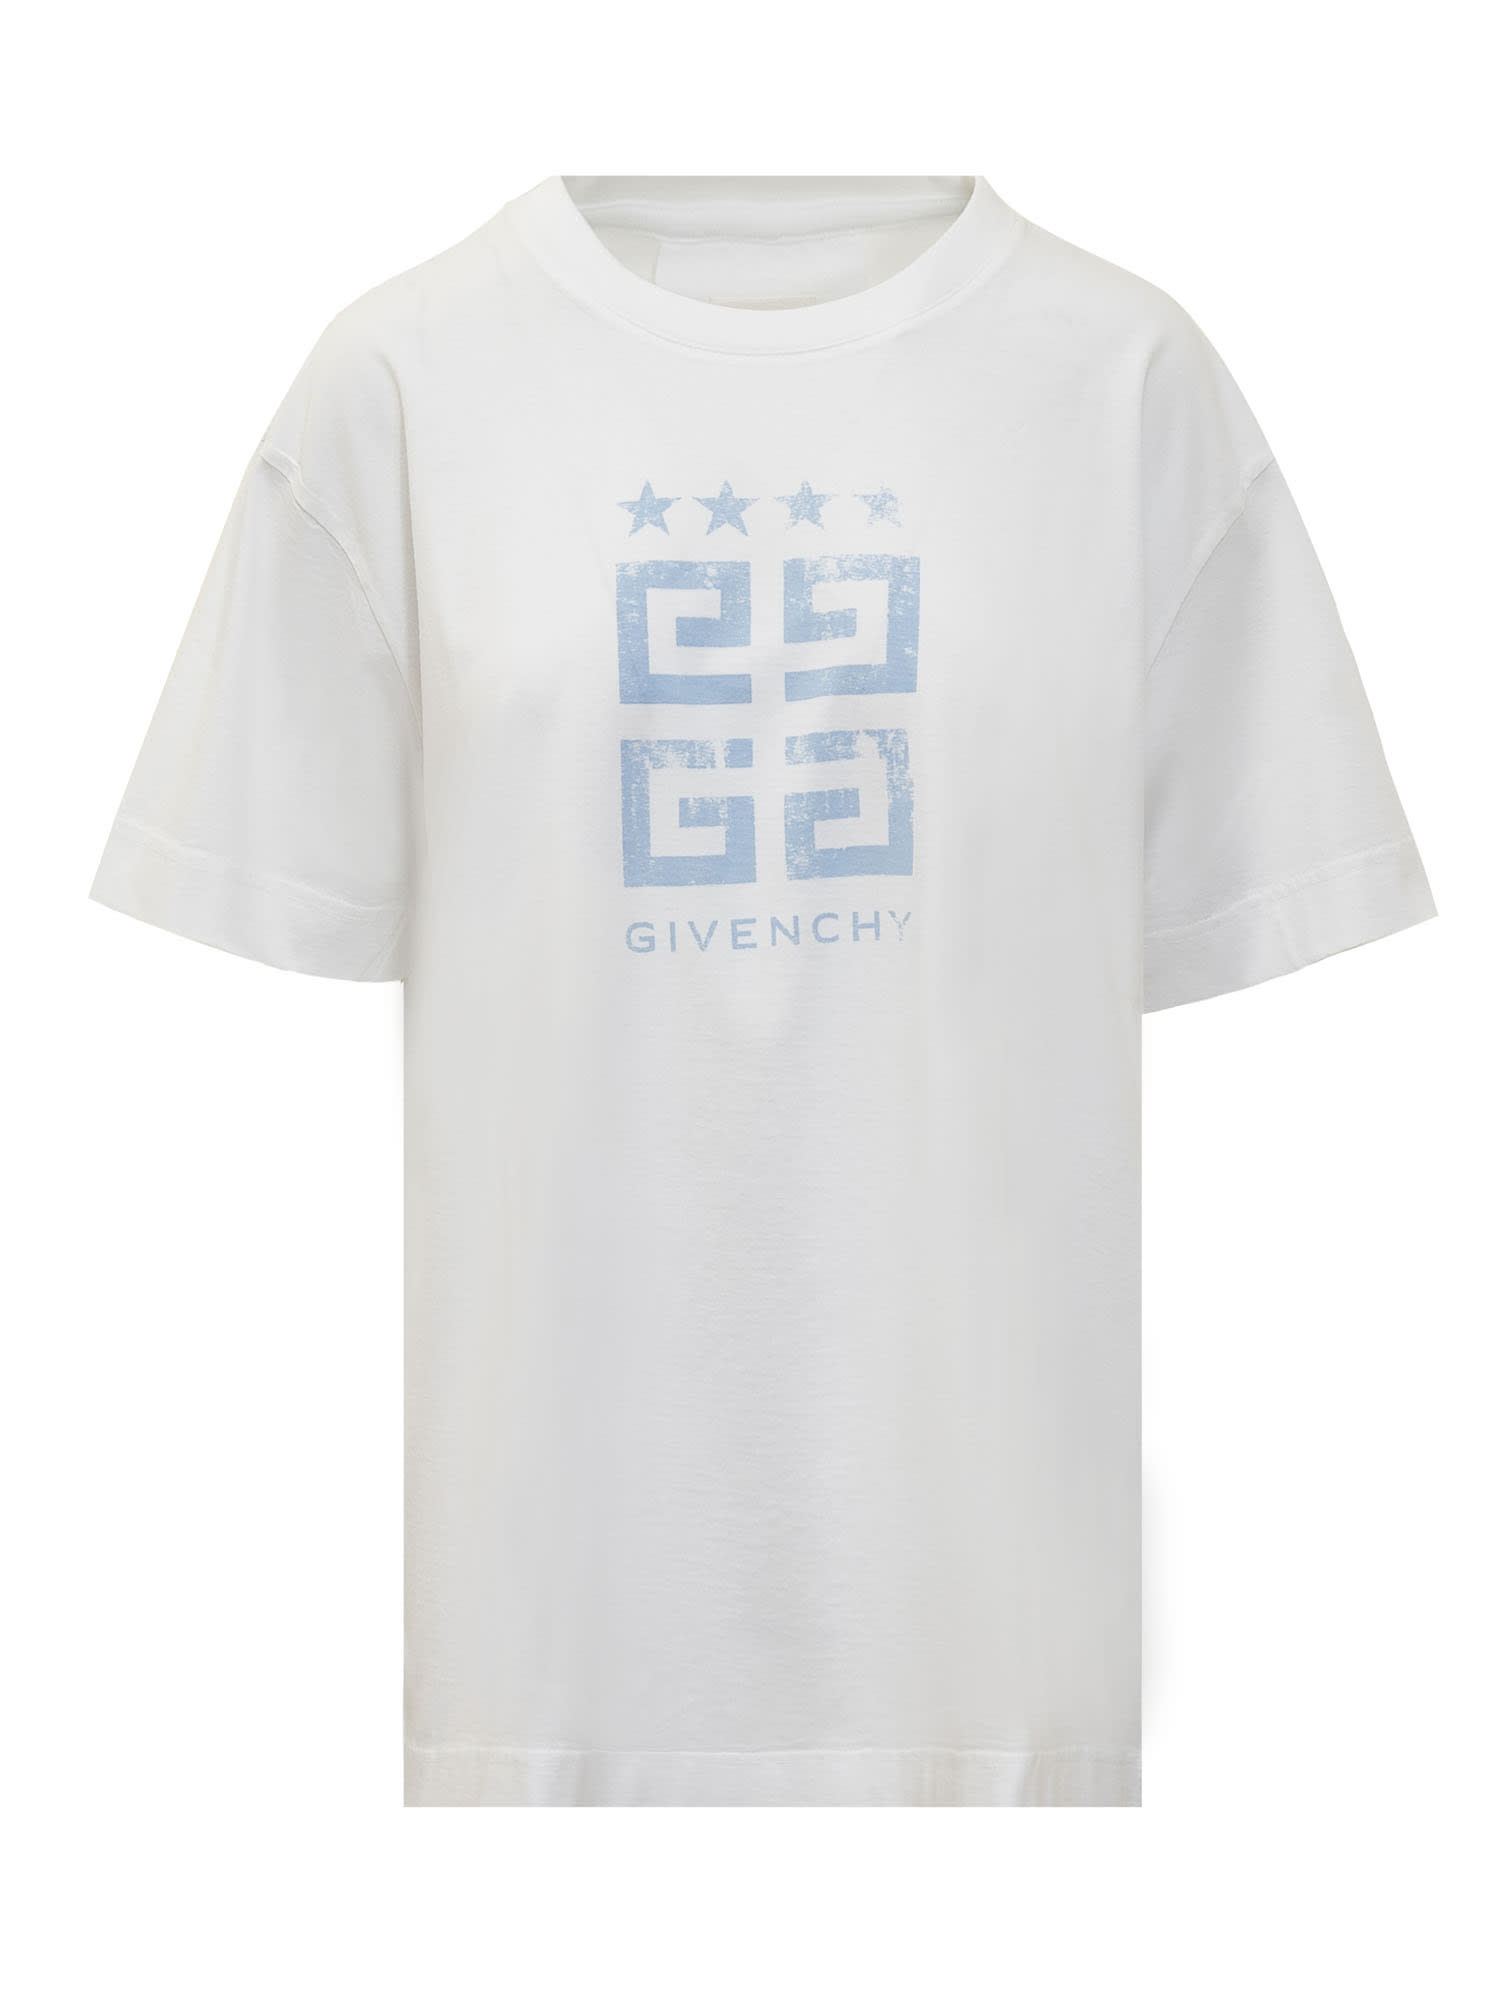 GIVENCHY CLASSIC FIT T-SHIRT